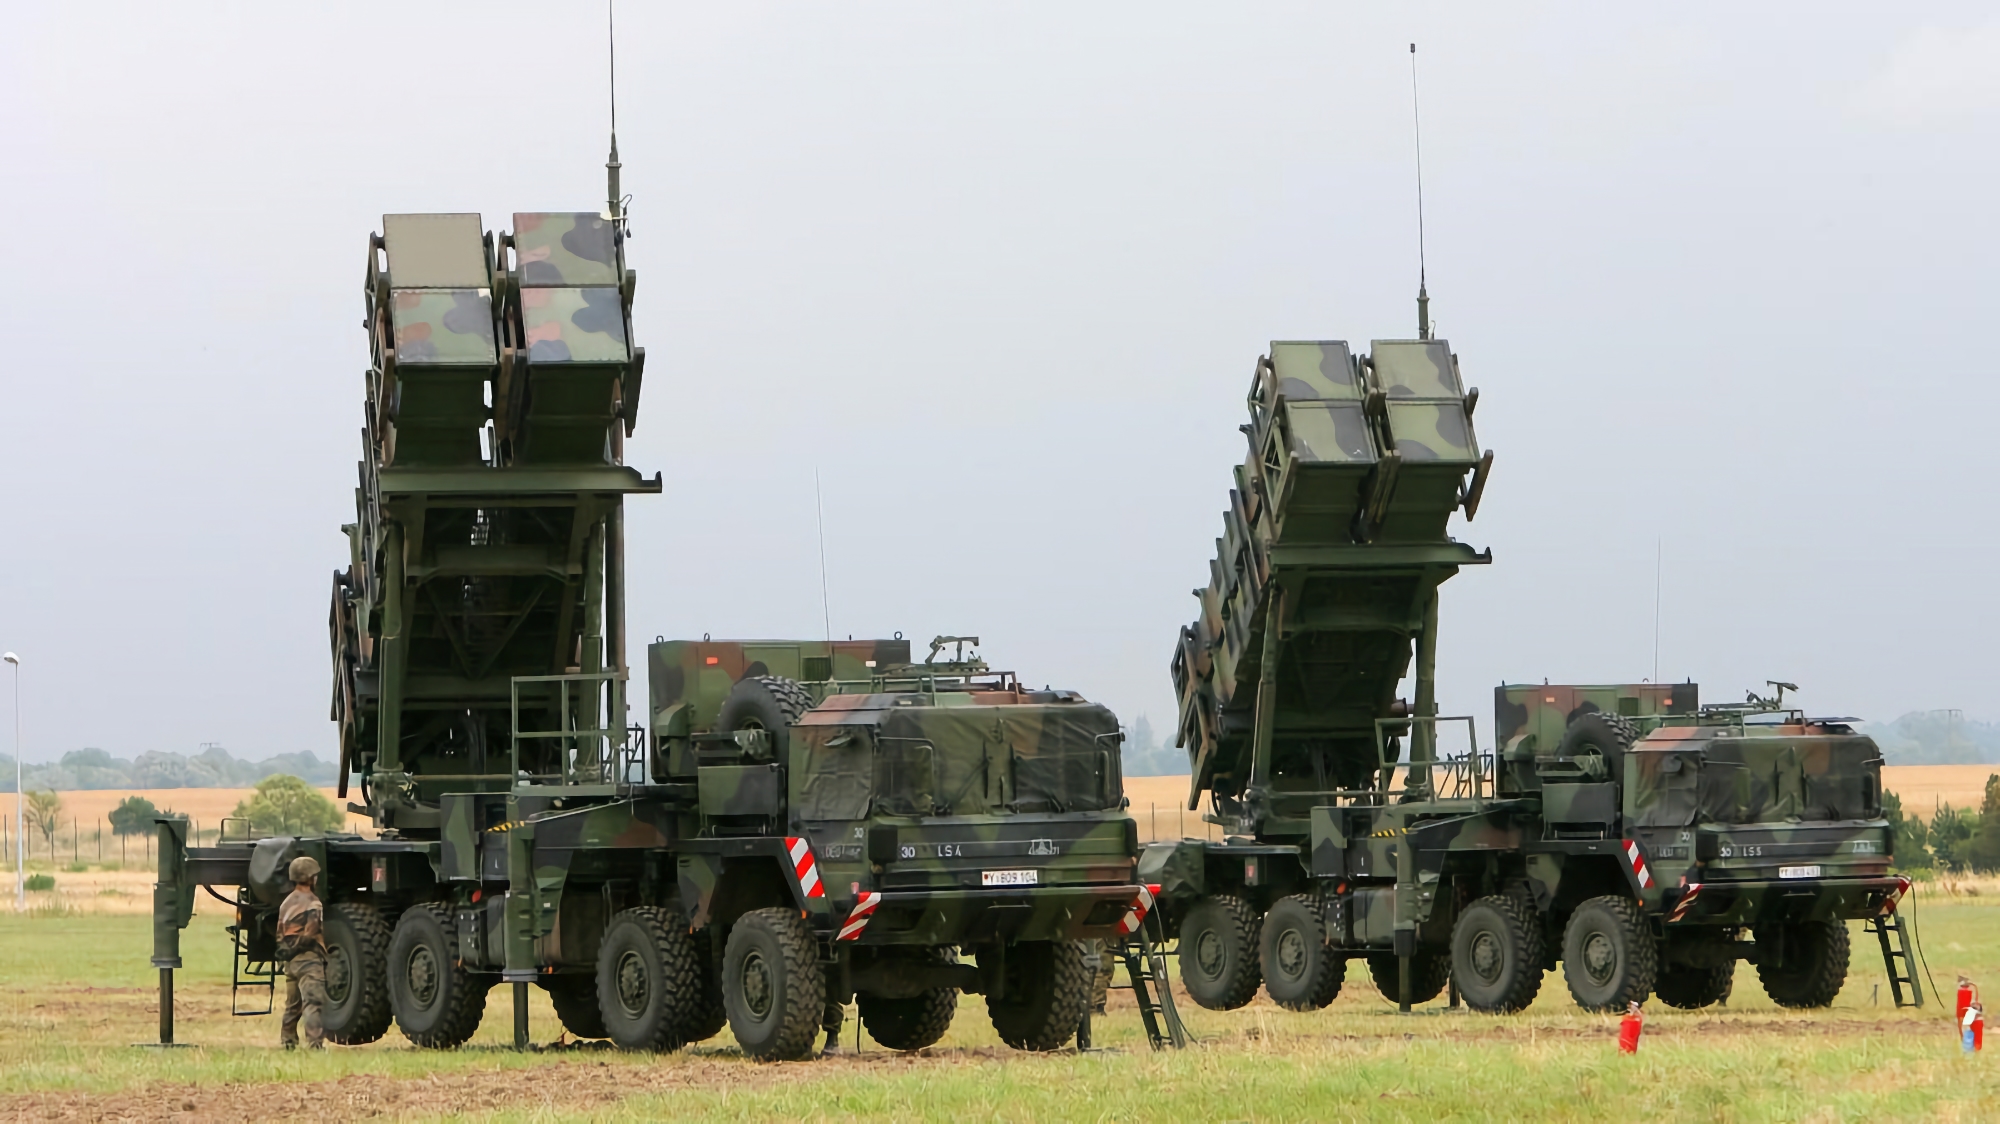 Ukrainian defence minister confirms Ukrainian Armed Forces receive MIM-104 Patriot surface-to-air missile system